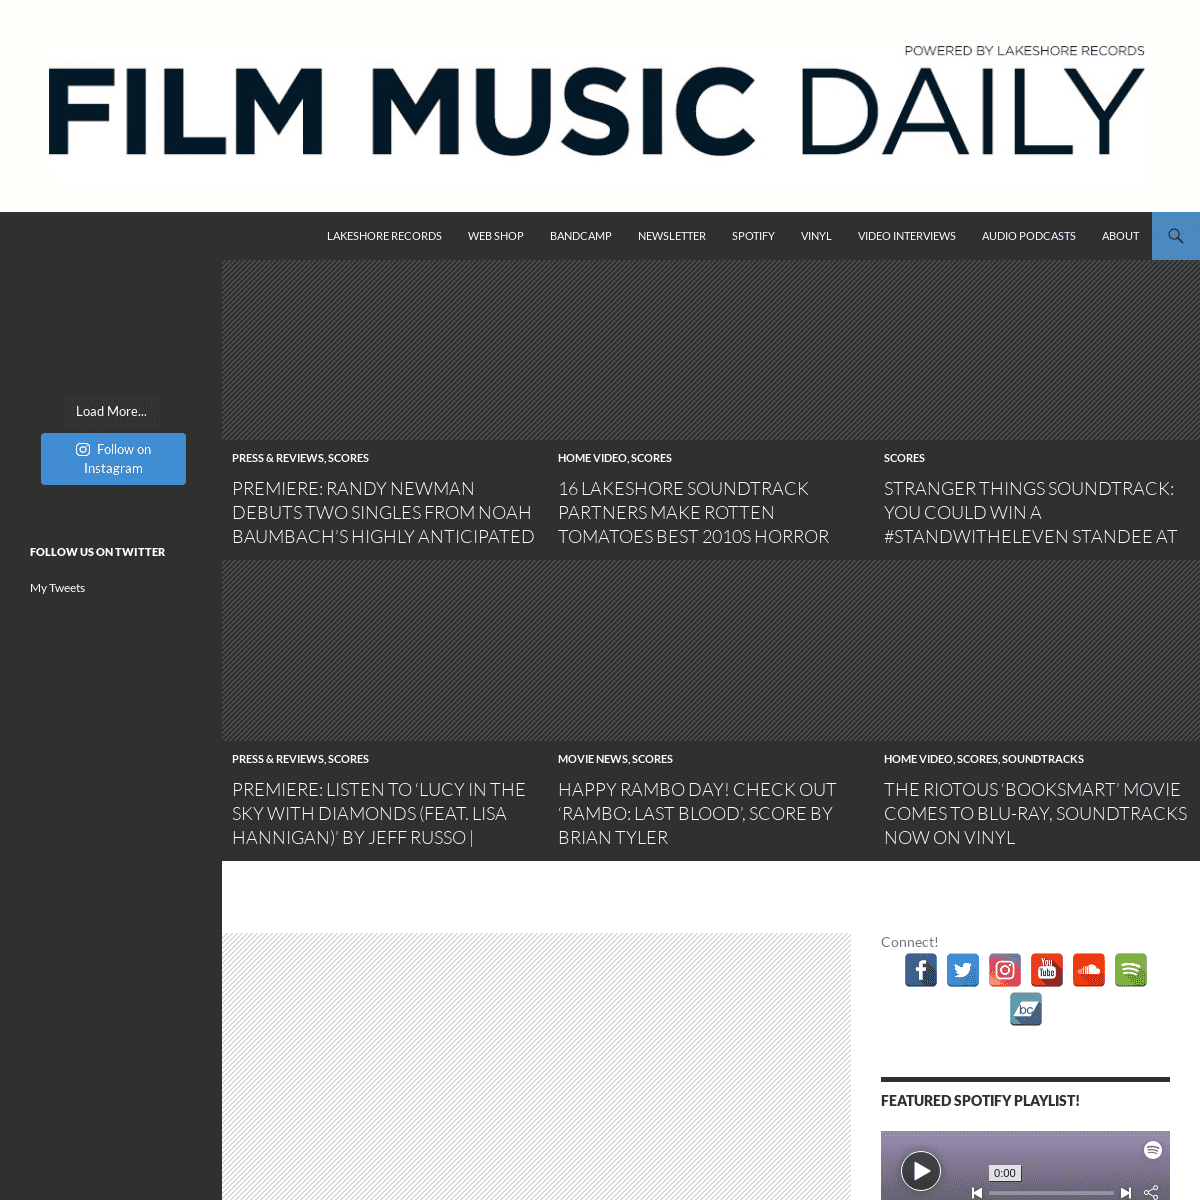 A complete backup of filmmusicdaily.com